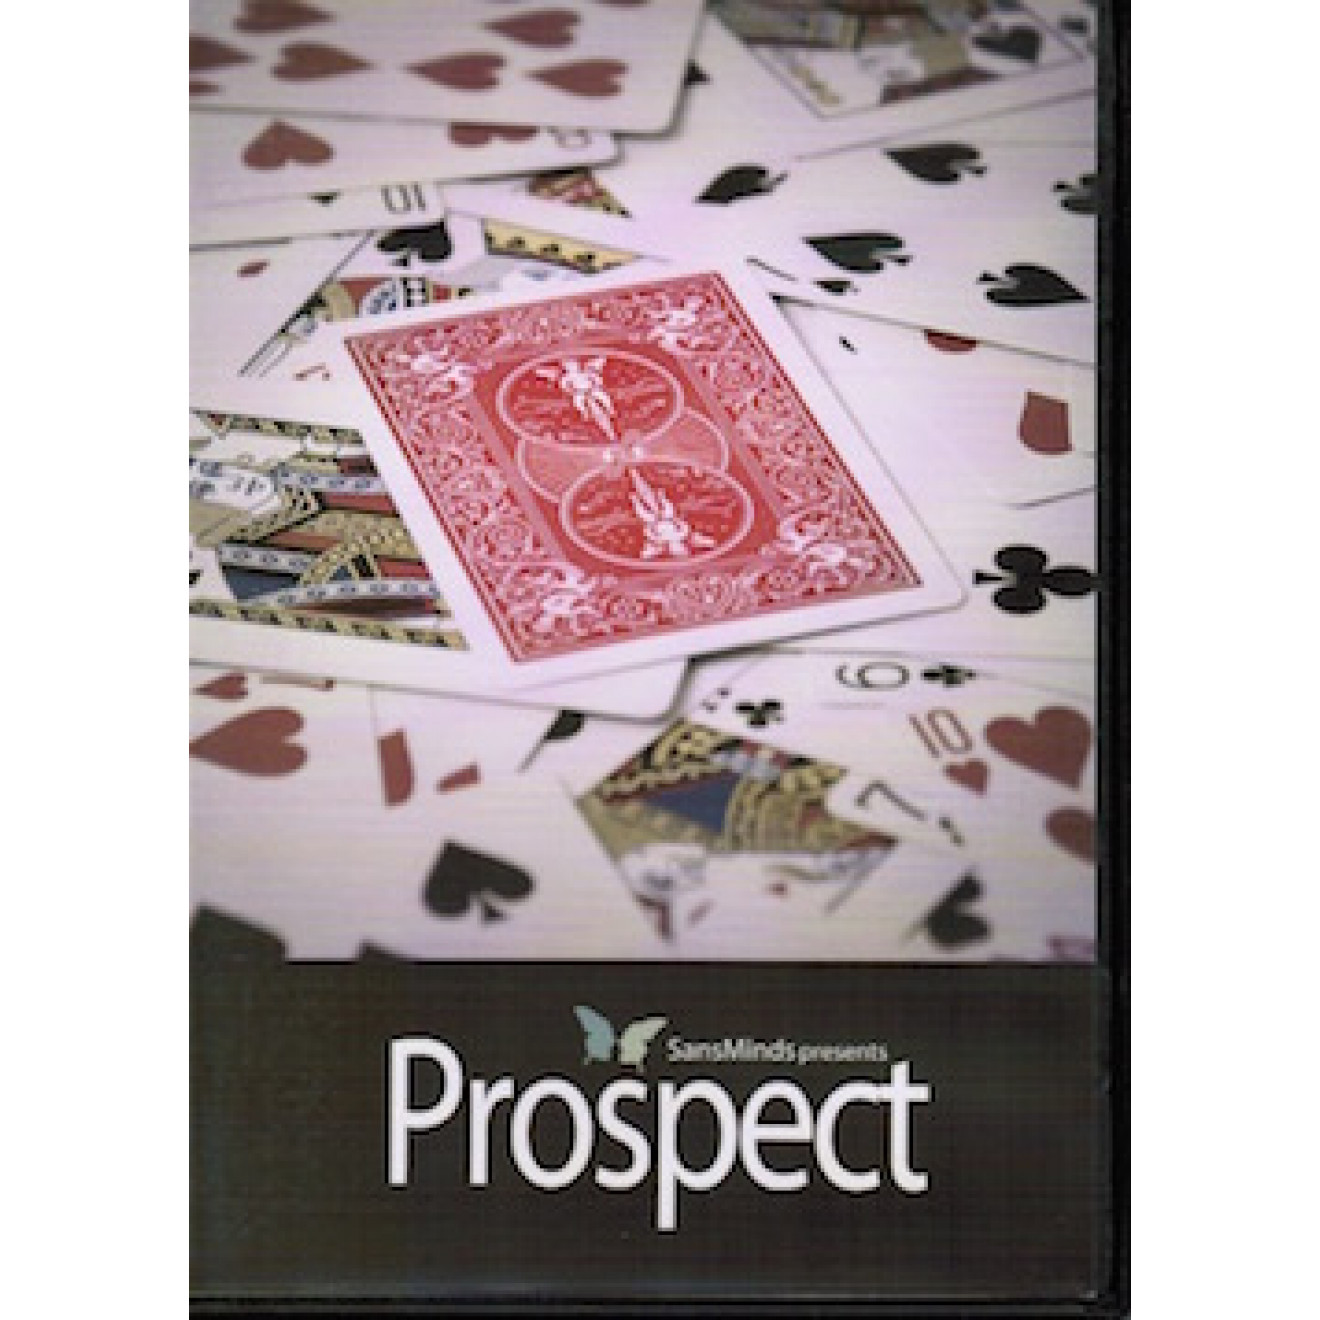 Prospect (DVD and Gimmick)